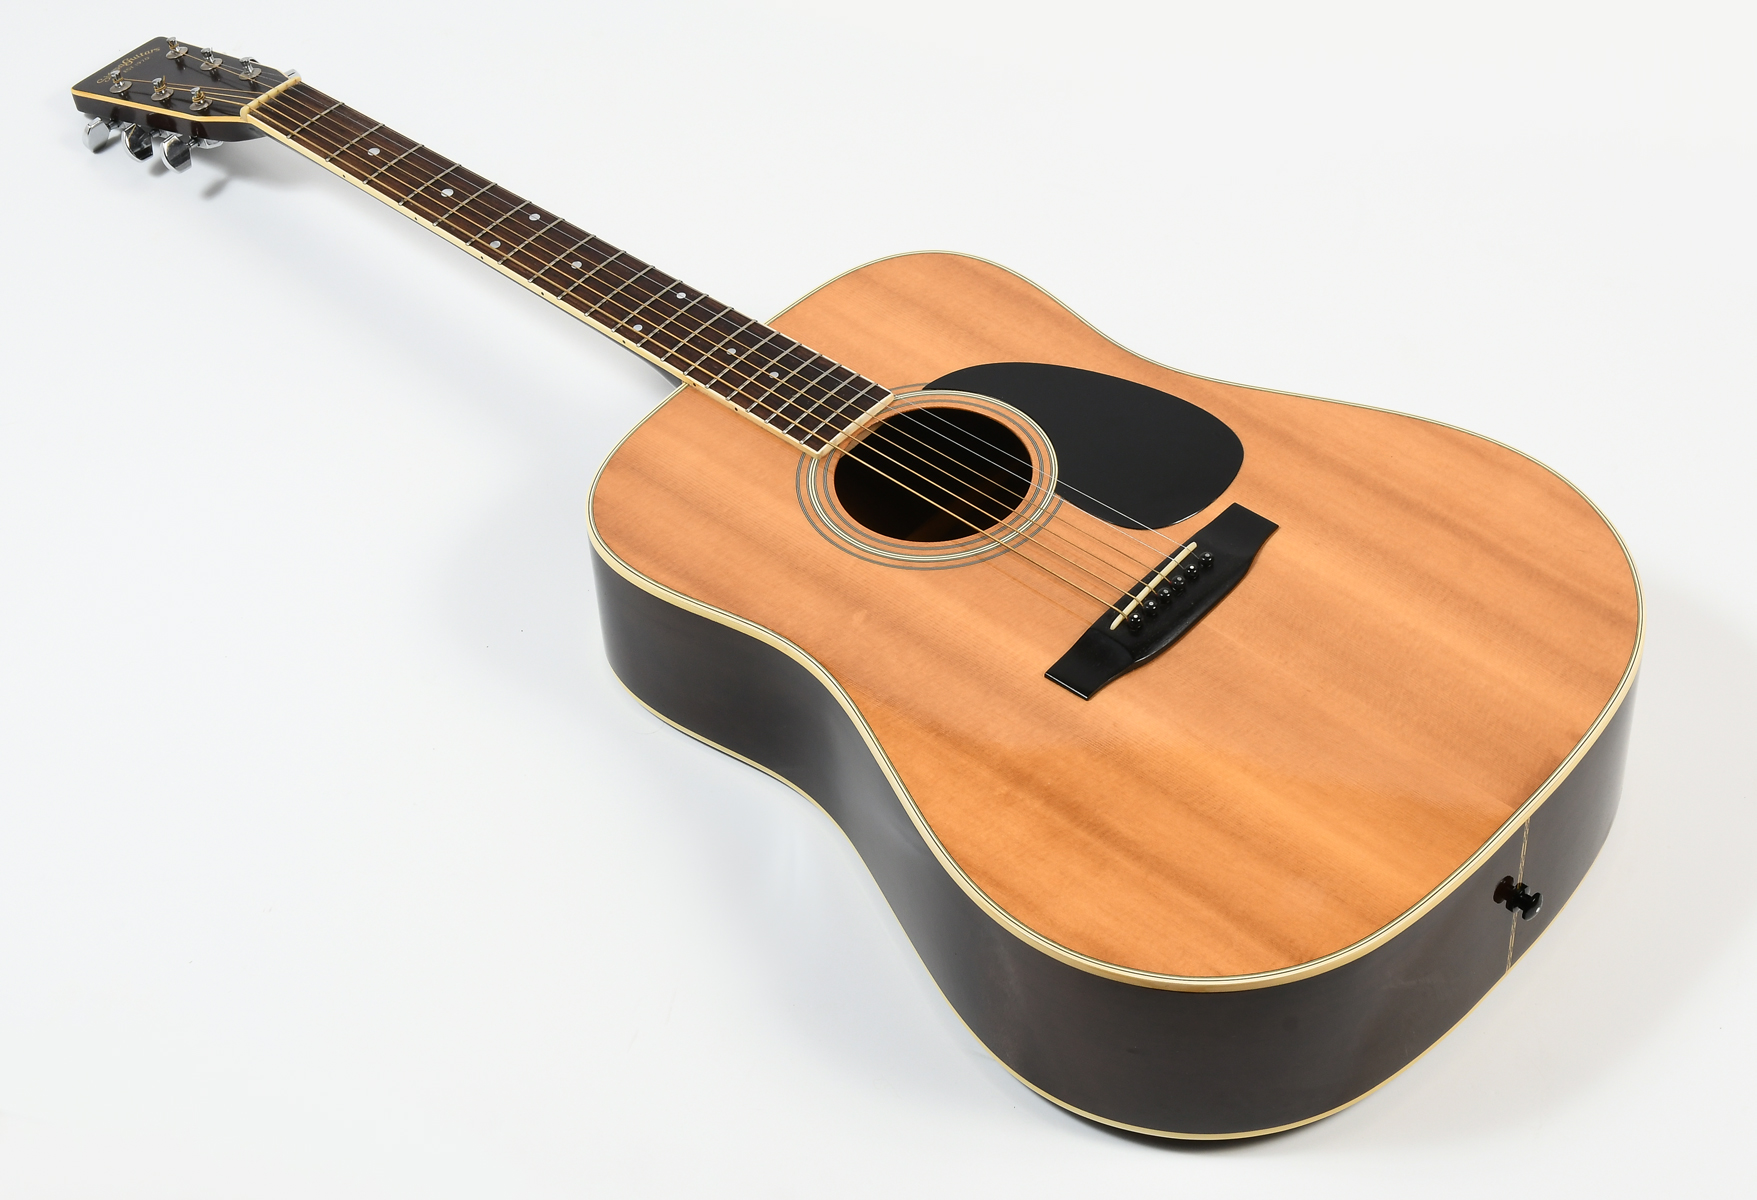 SIGMA DR-7 ACOUSTIC GUITAR BY MARTIN